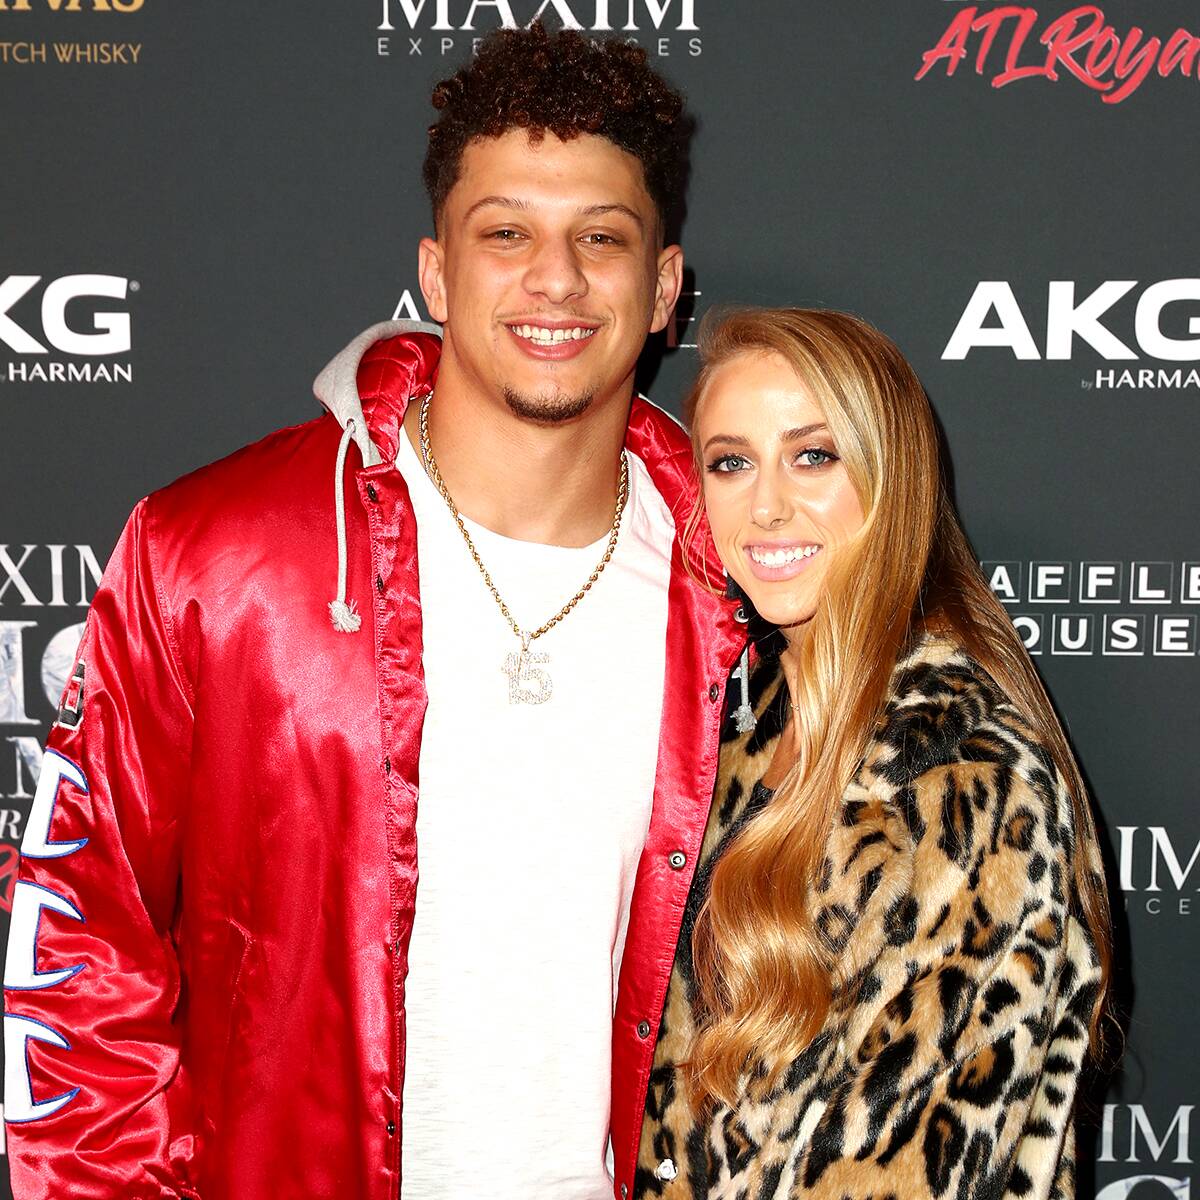 Patrick Mahomes and Fiancée Brittany Matthews Set Wedding Date After Welcoming Baby Sterling